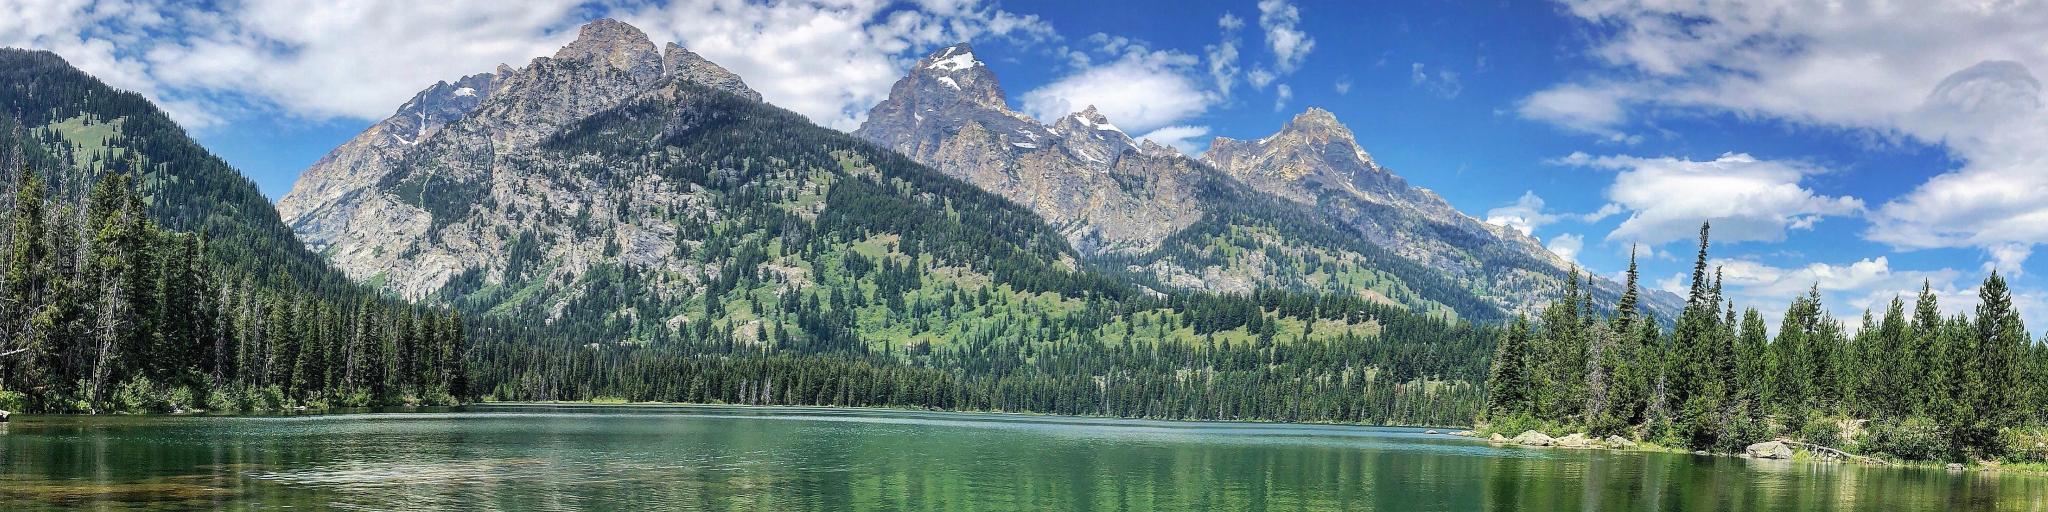 Grand Teton National Park, Wyoming with a reflection of the forest and mountains in the lake in the foreground on a cloudy blue sky.